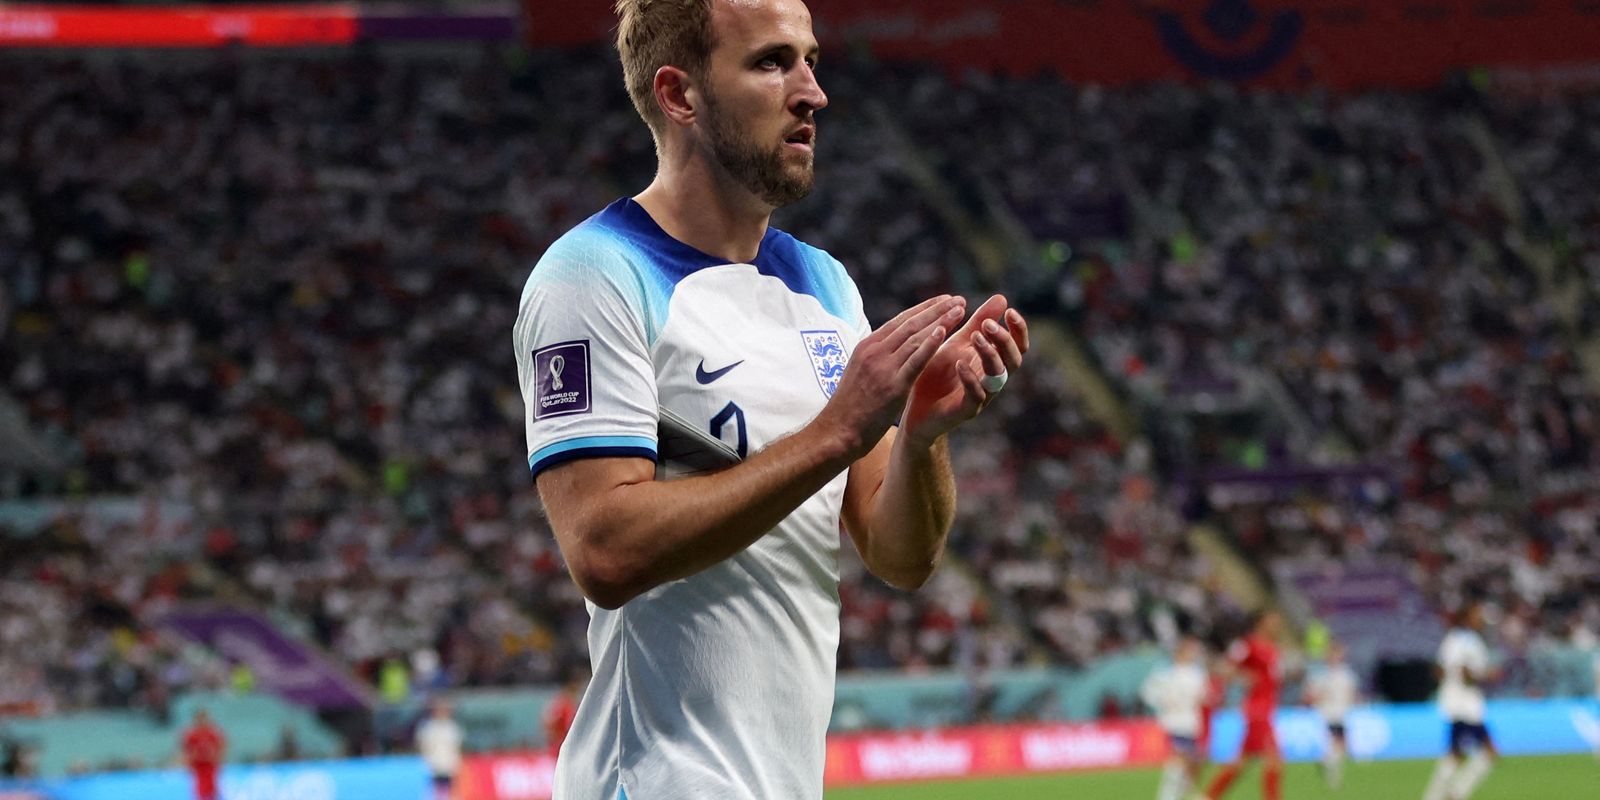 World Cup: England and Netherlands seek early qualification this Friday
– News X